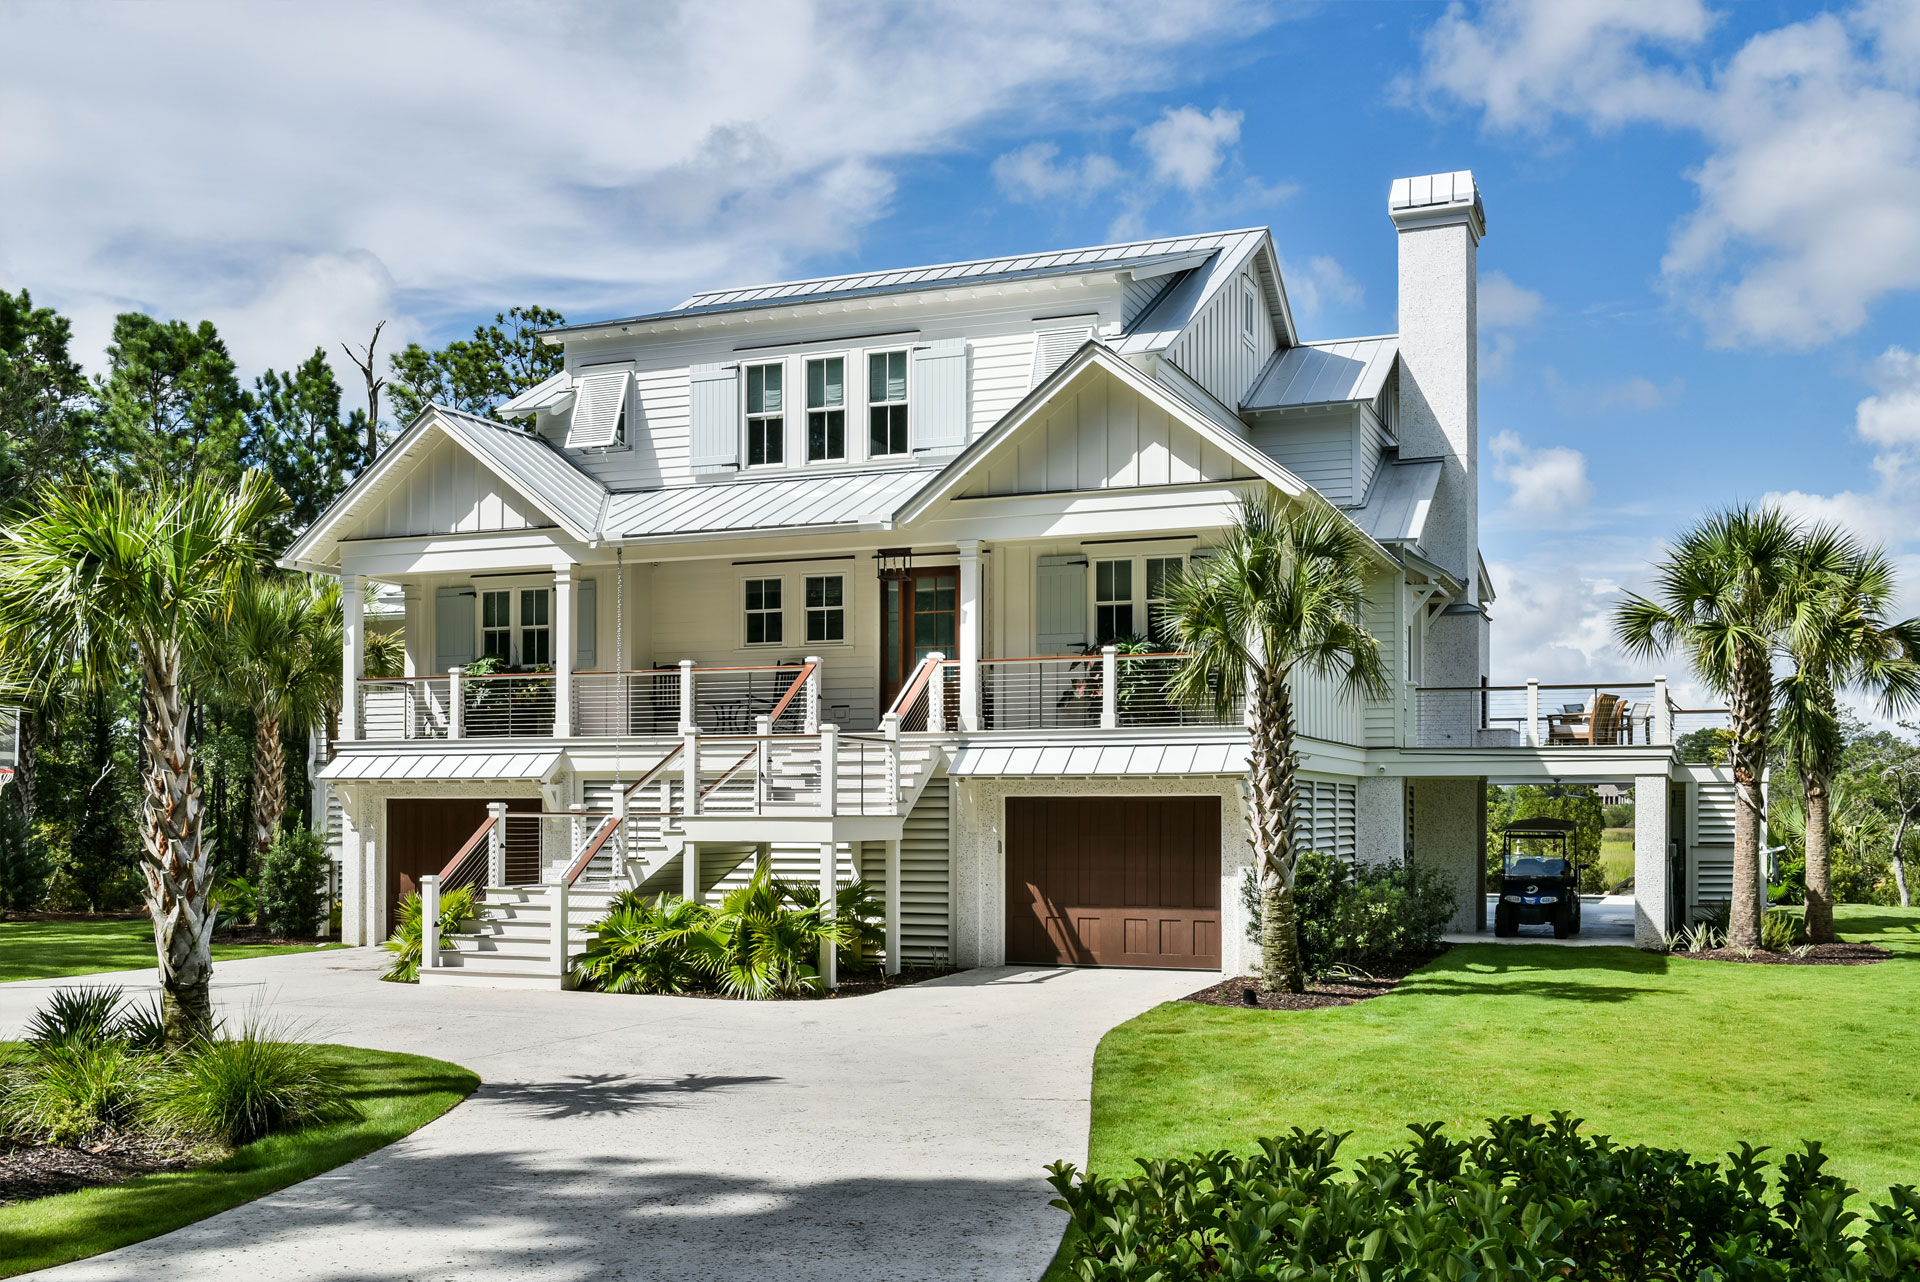 Modern, coastal, luxury home--elevated with porches sophisticated roof line